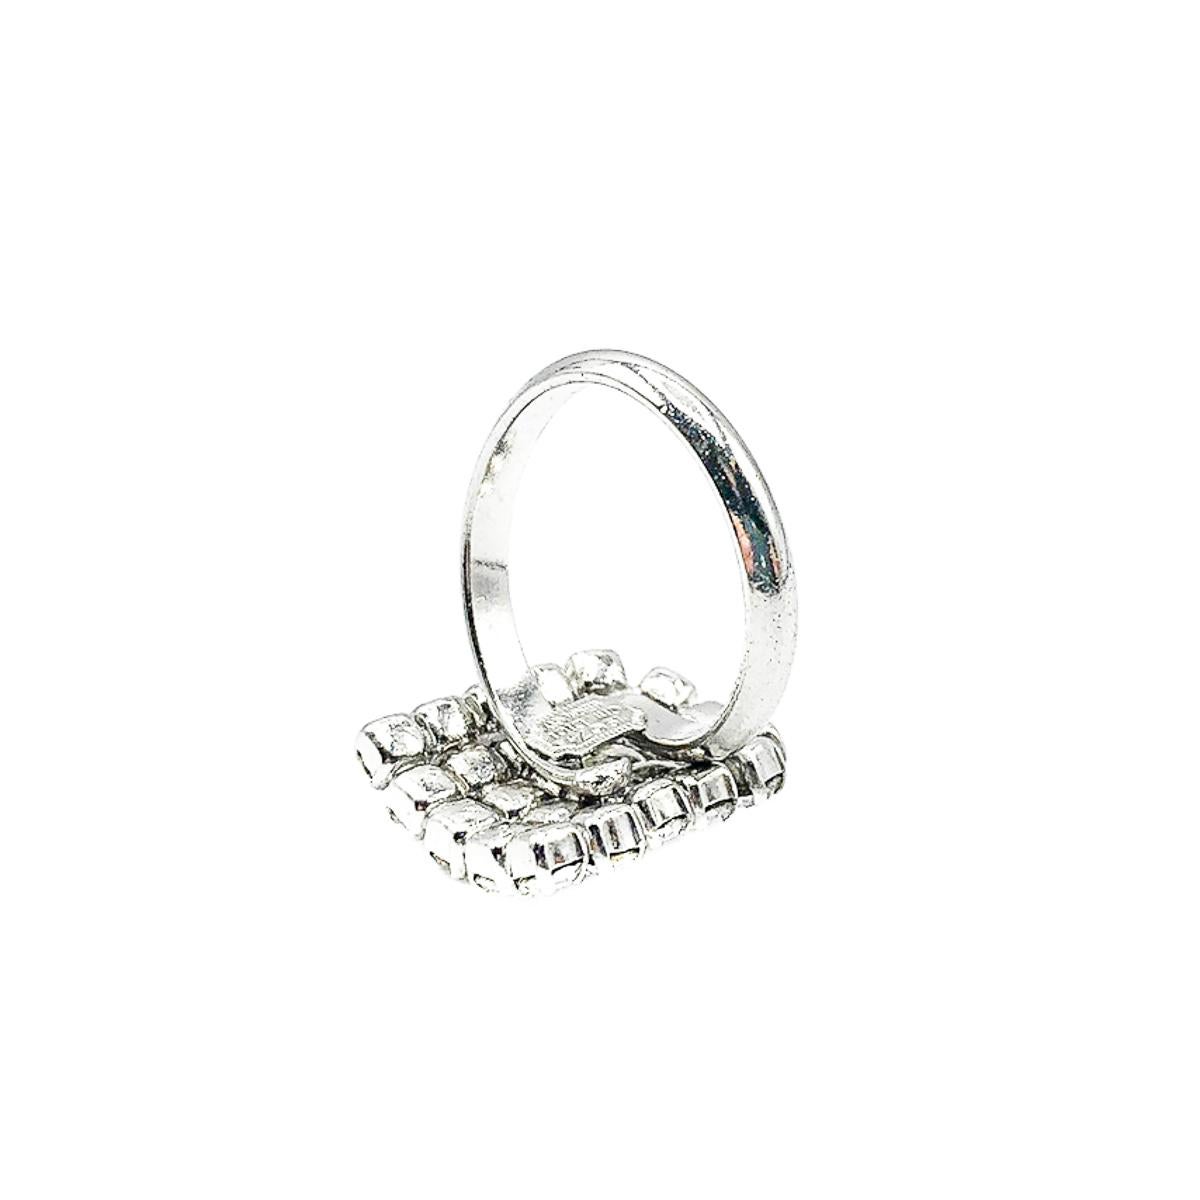 A beautiful Vintage Dior Crystal Cocktail Ring. Crafted in rhodium plated metal and set with Swarovski chaton stones, individually claw set. In very good vintage condition, UK ring size approx. N with adjustable band, signed. A stunningly glamorous